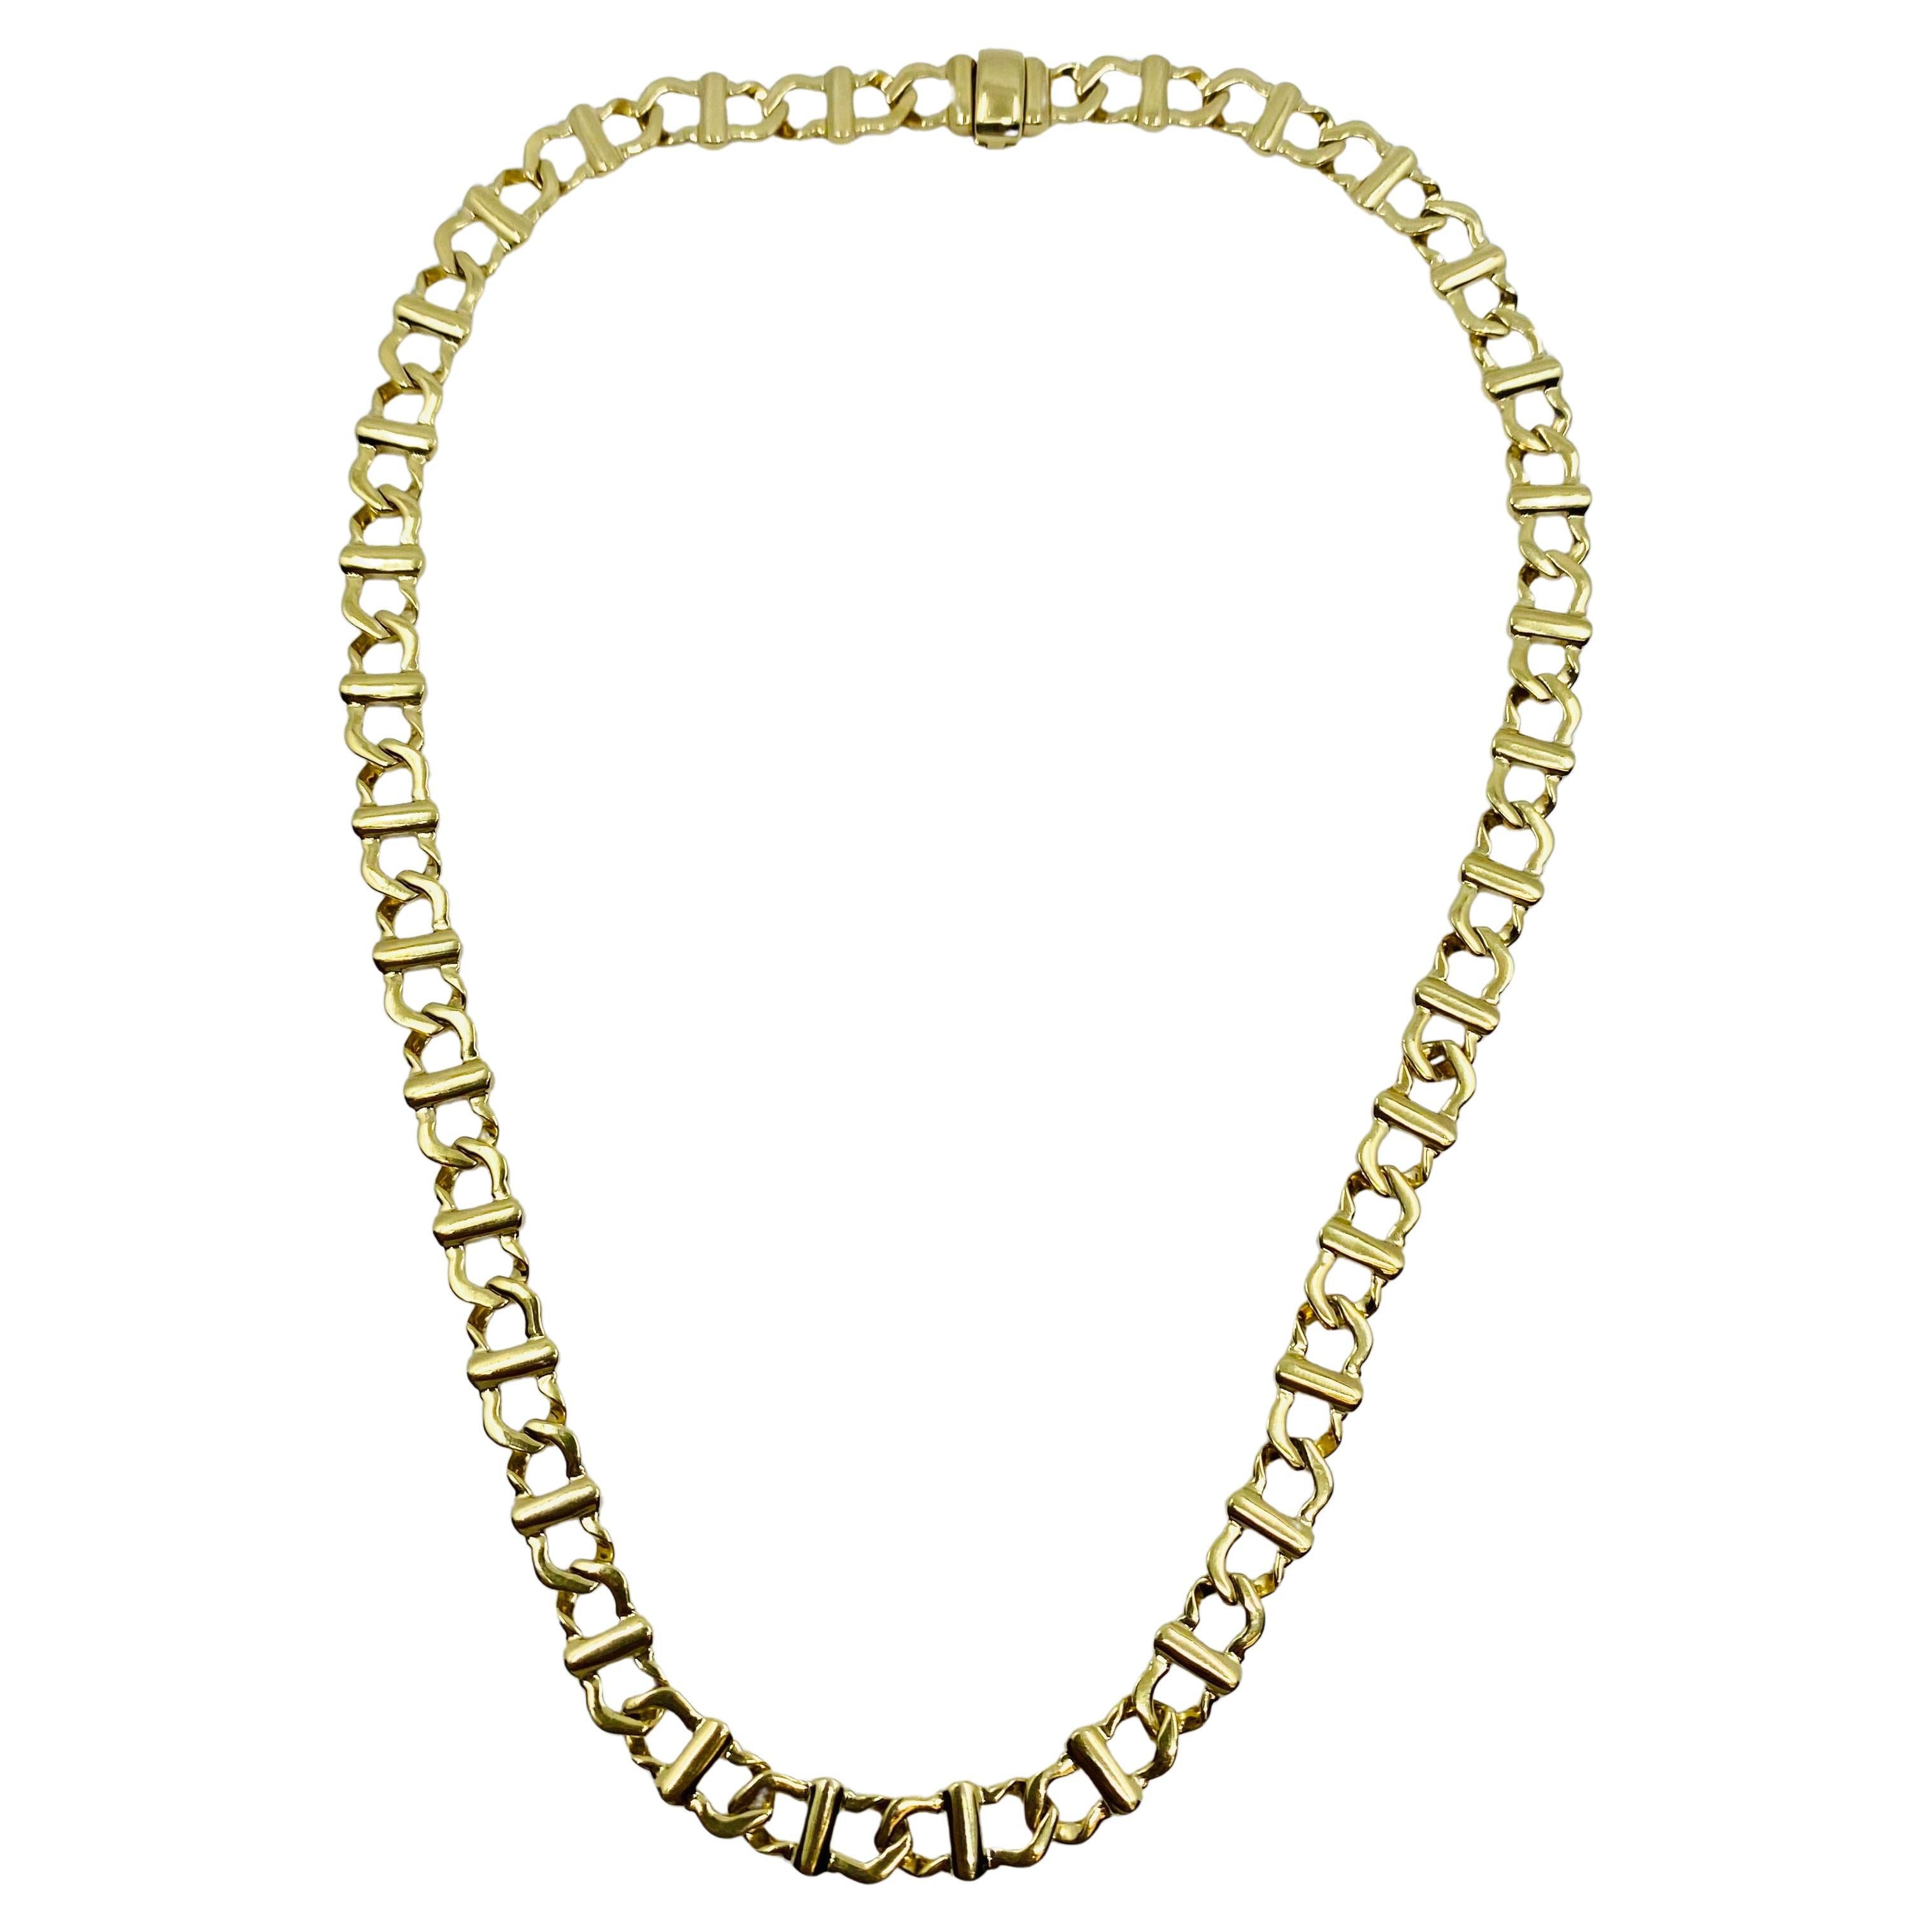  Cartier Yellow Gold Chain Necklace 18k In Excellent Condition For Sale In Beverly Hills, CA